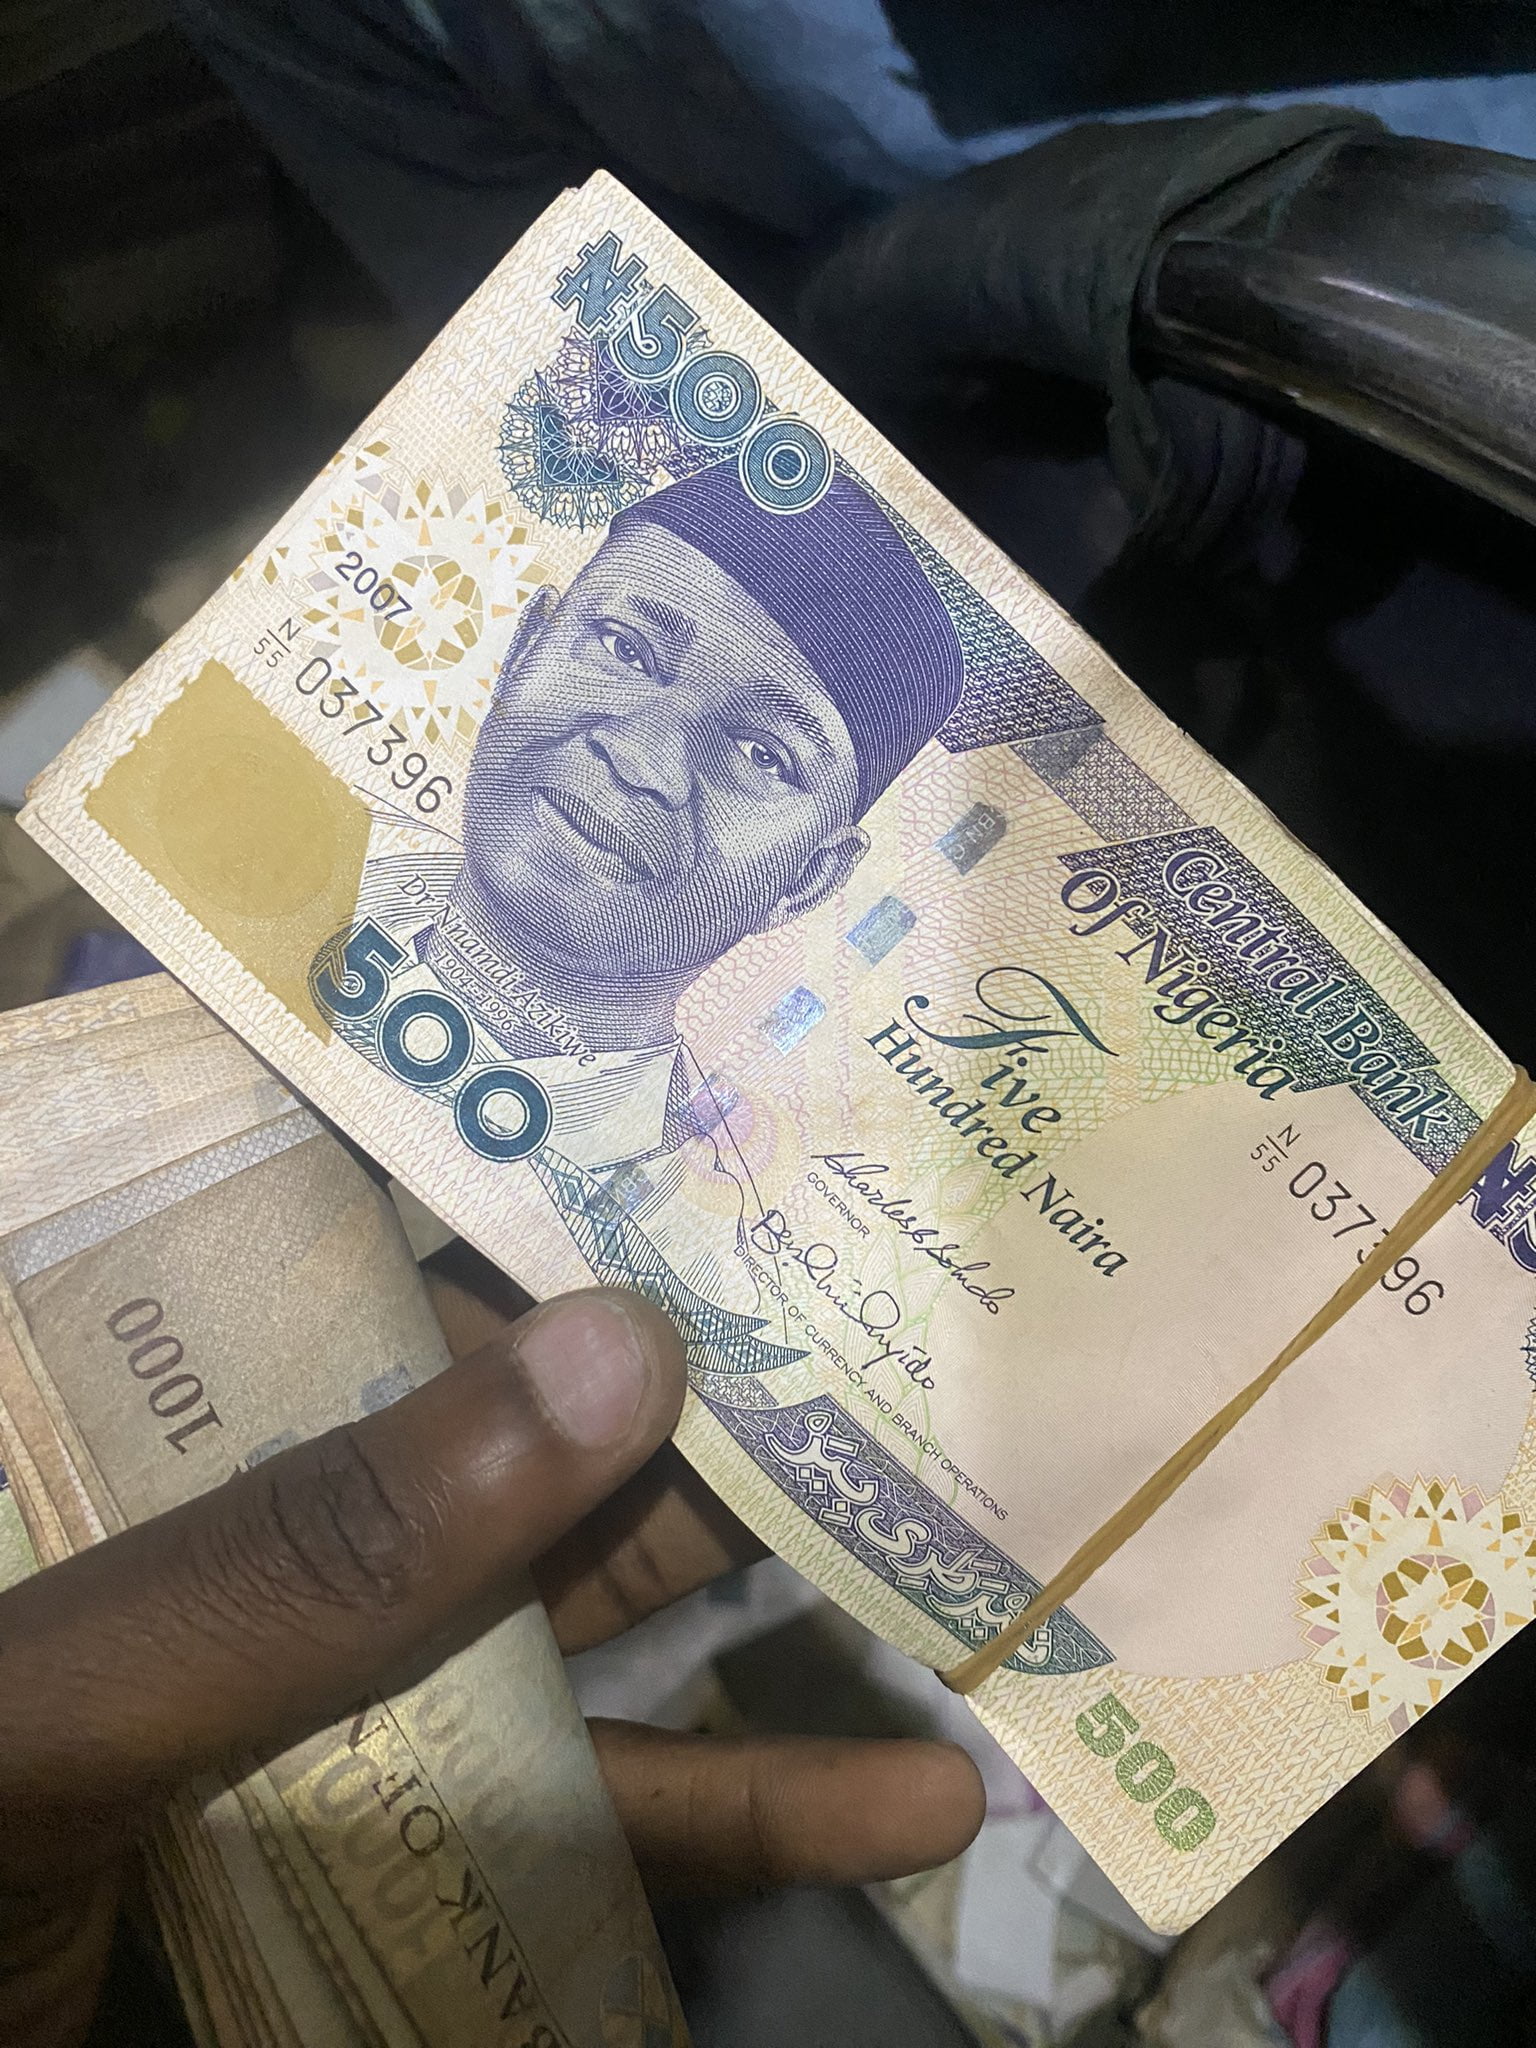 Nigerians react as over 15 year old Naira notes begin to resurface following CBN announcement [photos]